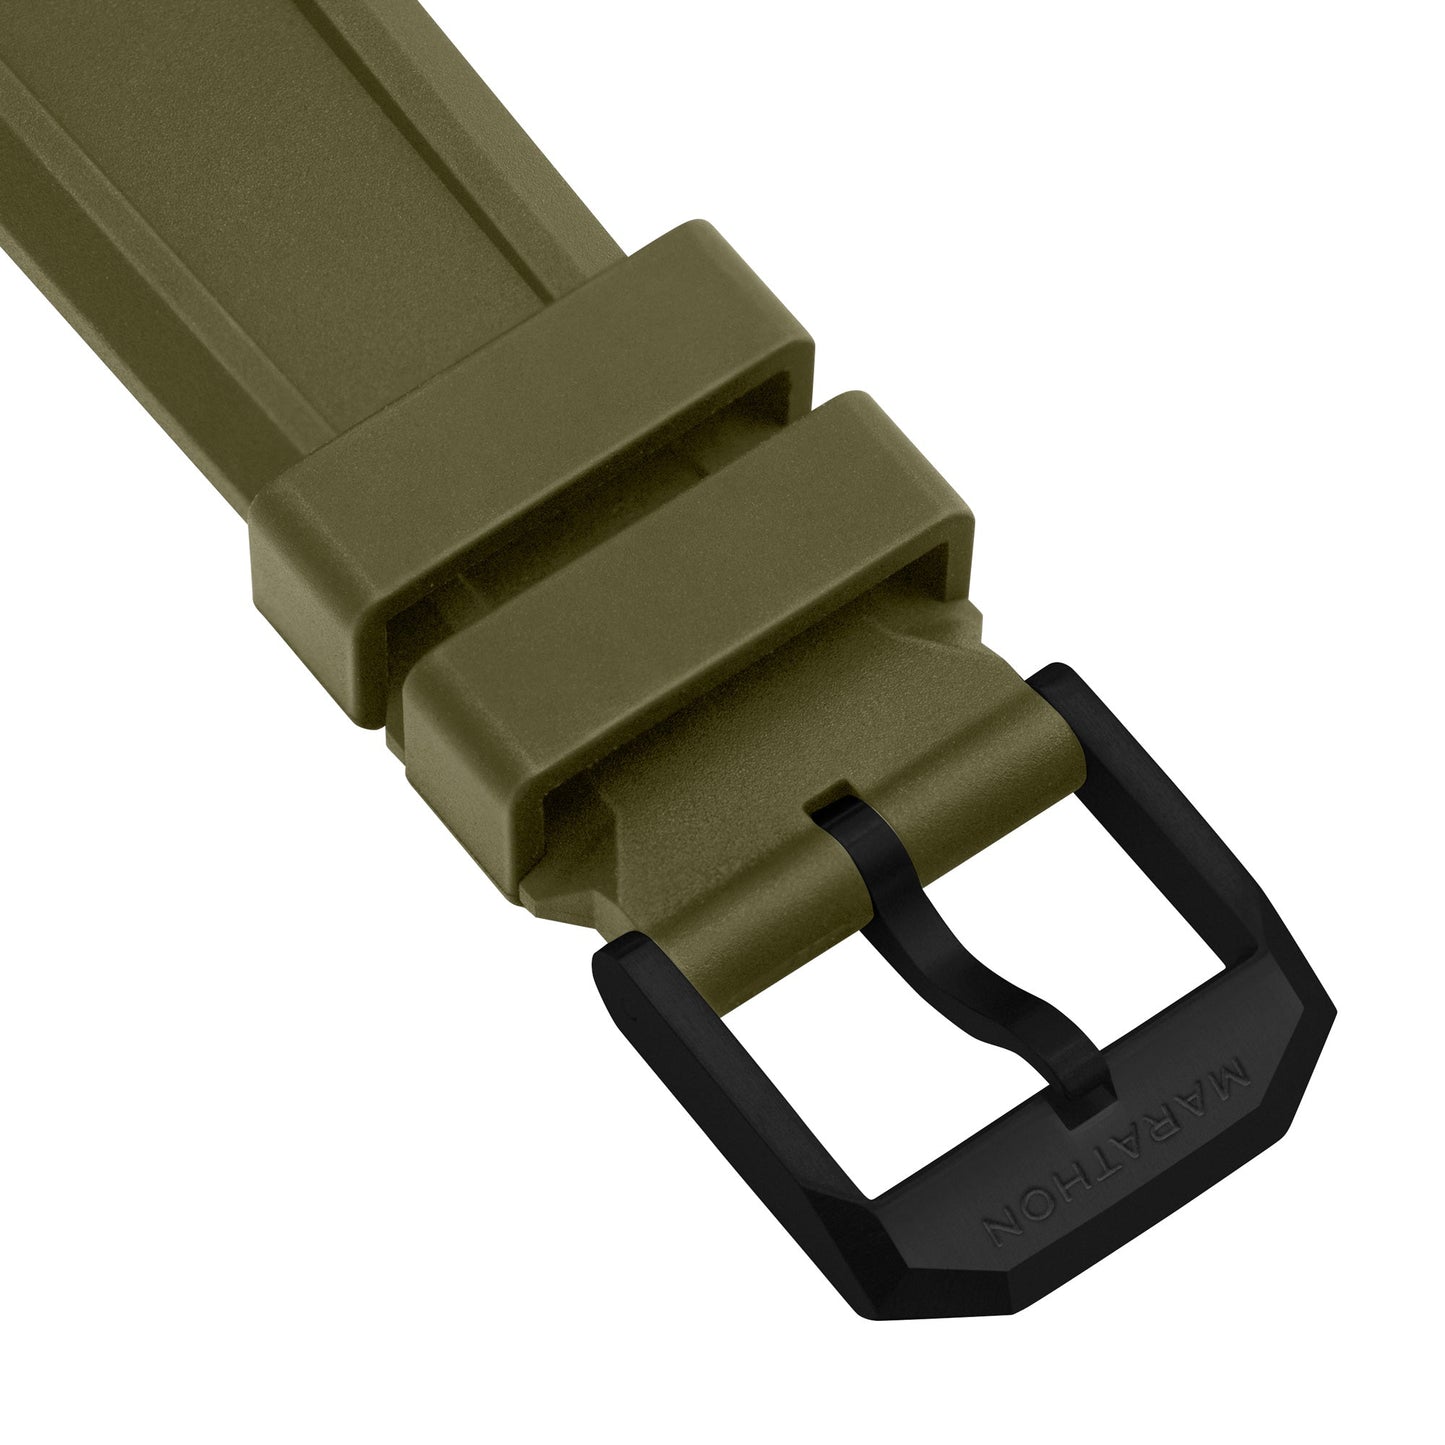 3-PIECE RUBBER STRAP KIT, OD GREEN, ANTHRACITE, 20MM